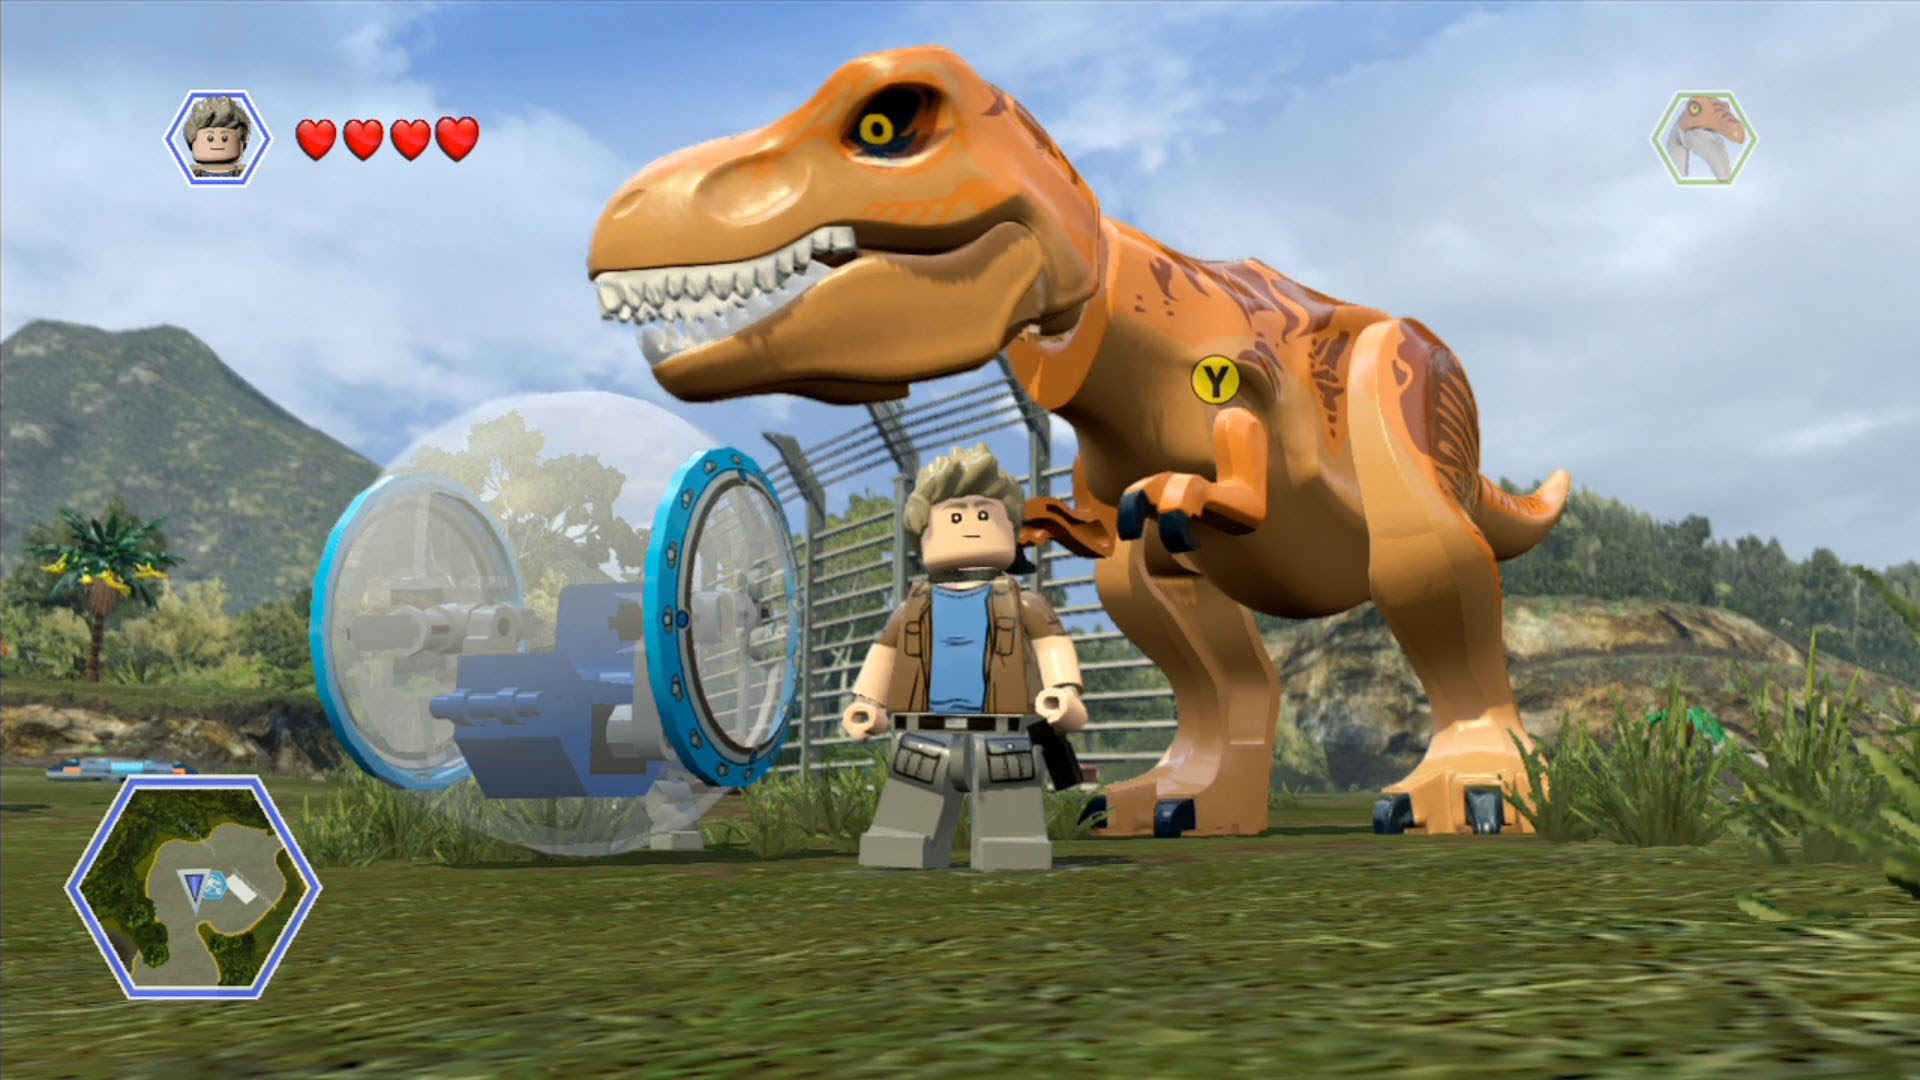 LEGO Jurassic World Pics, Video Game Collection